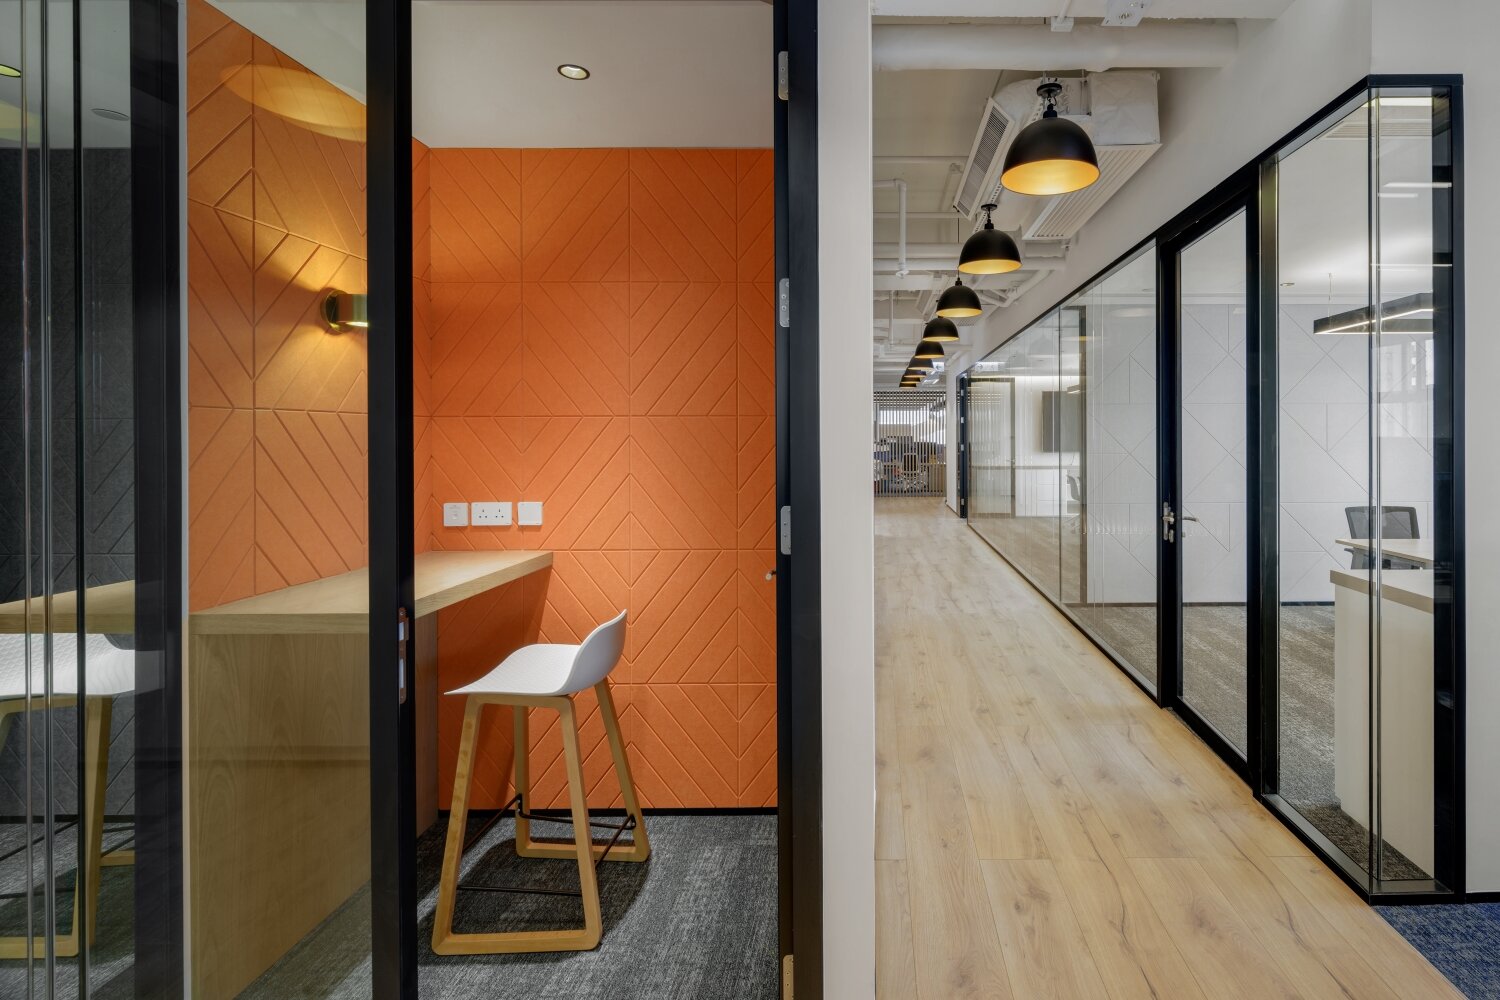   office design &amp; build   We specialise in workplace fit-out, design &amp; build &amp; project management 